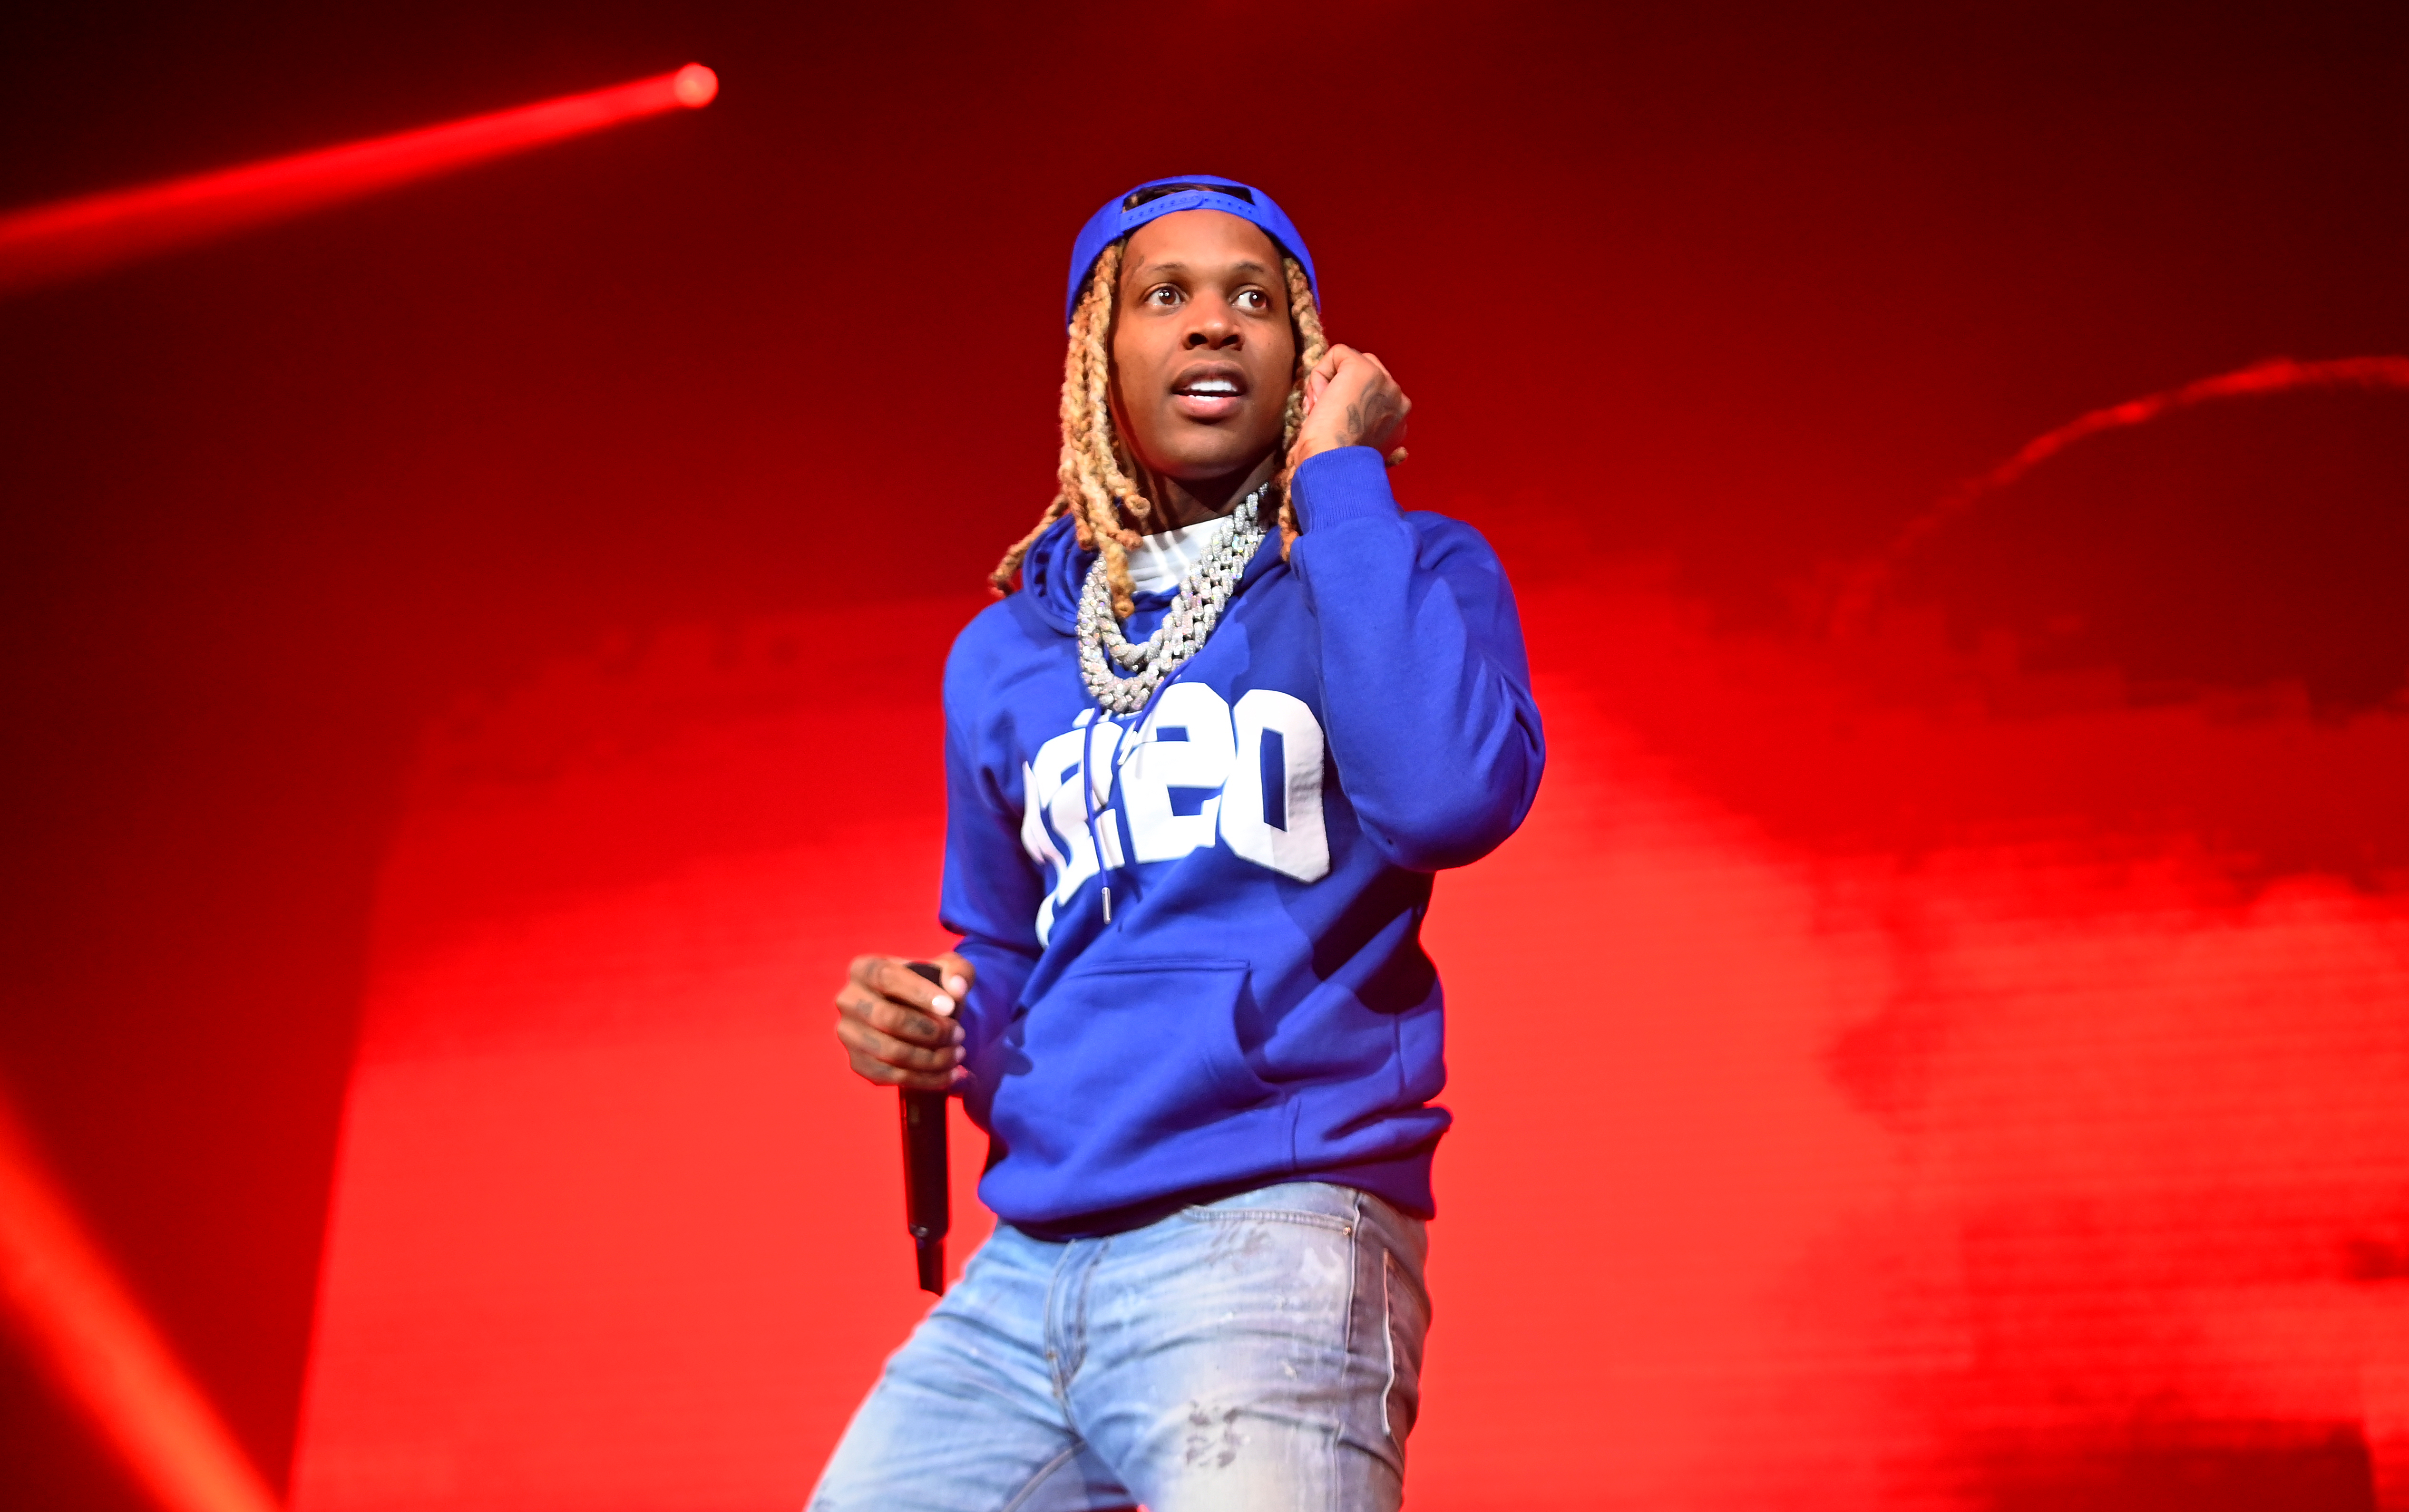 Lil Durk Discusses How Therapy Has Helped Him “Cope Different”